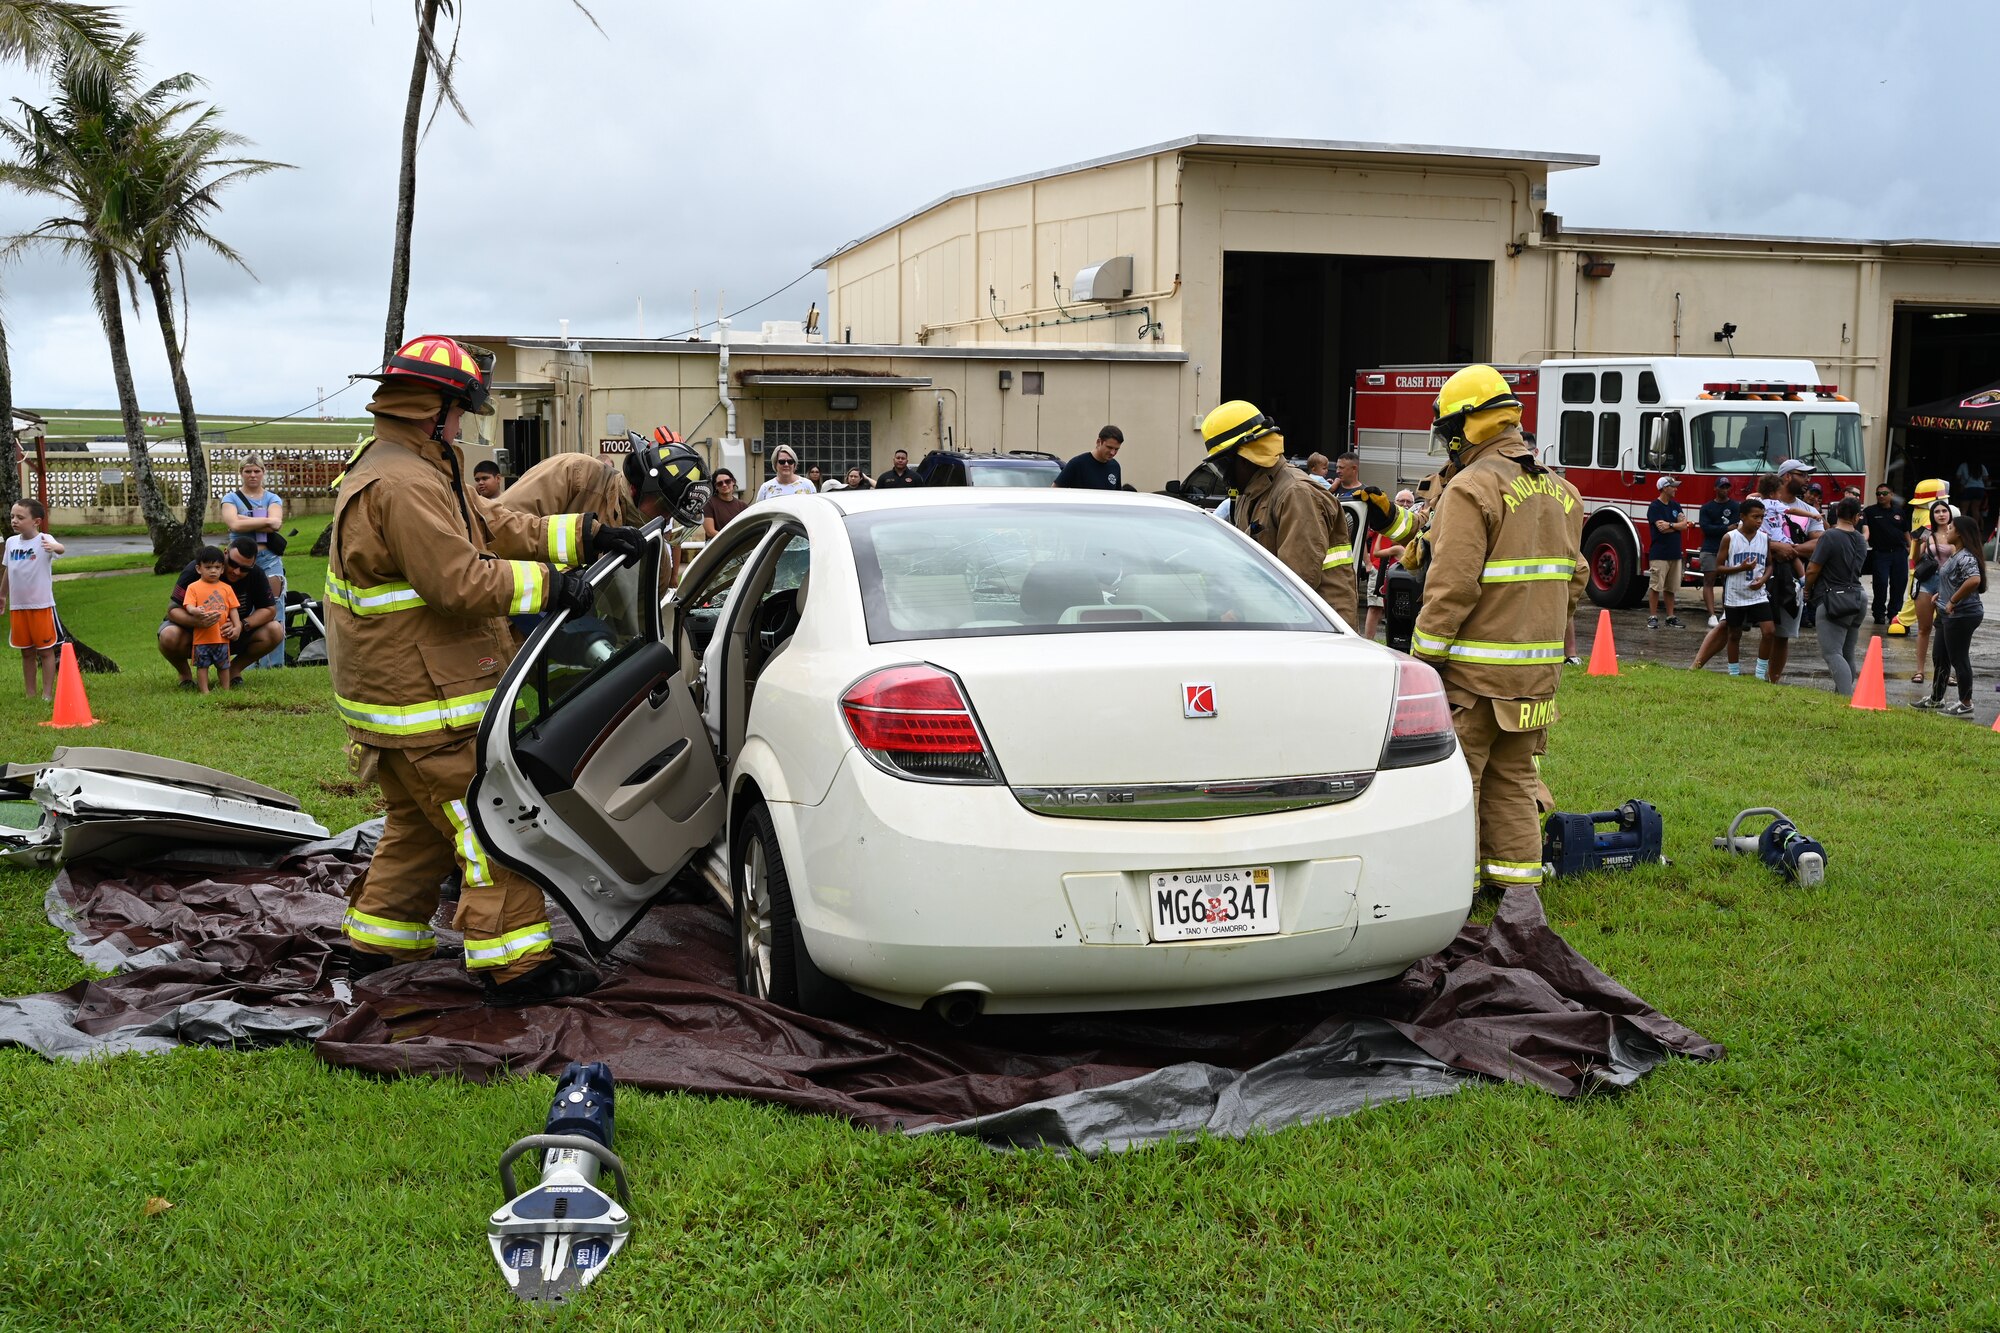 36th Civil Engineer Squadron firefighters take apart a vehicle